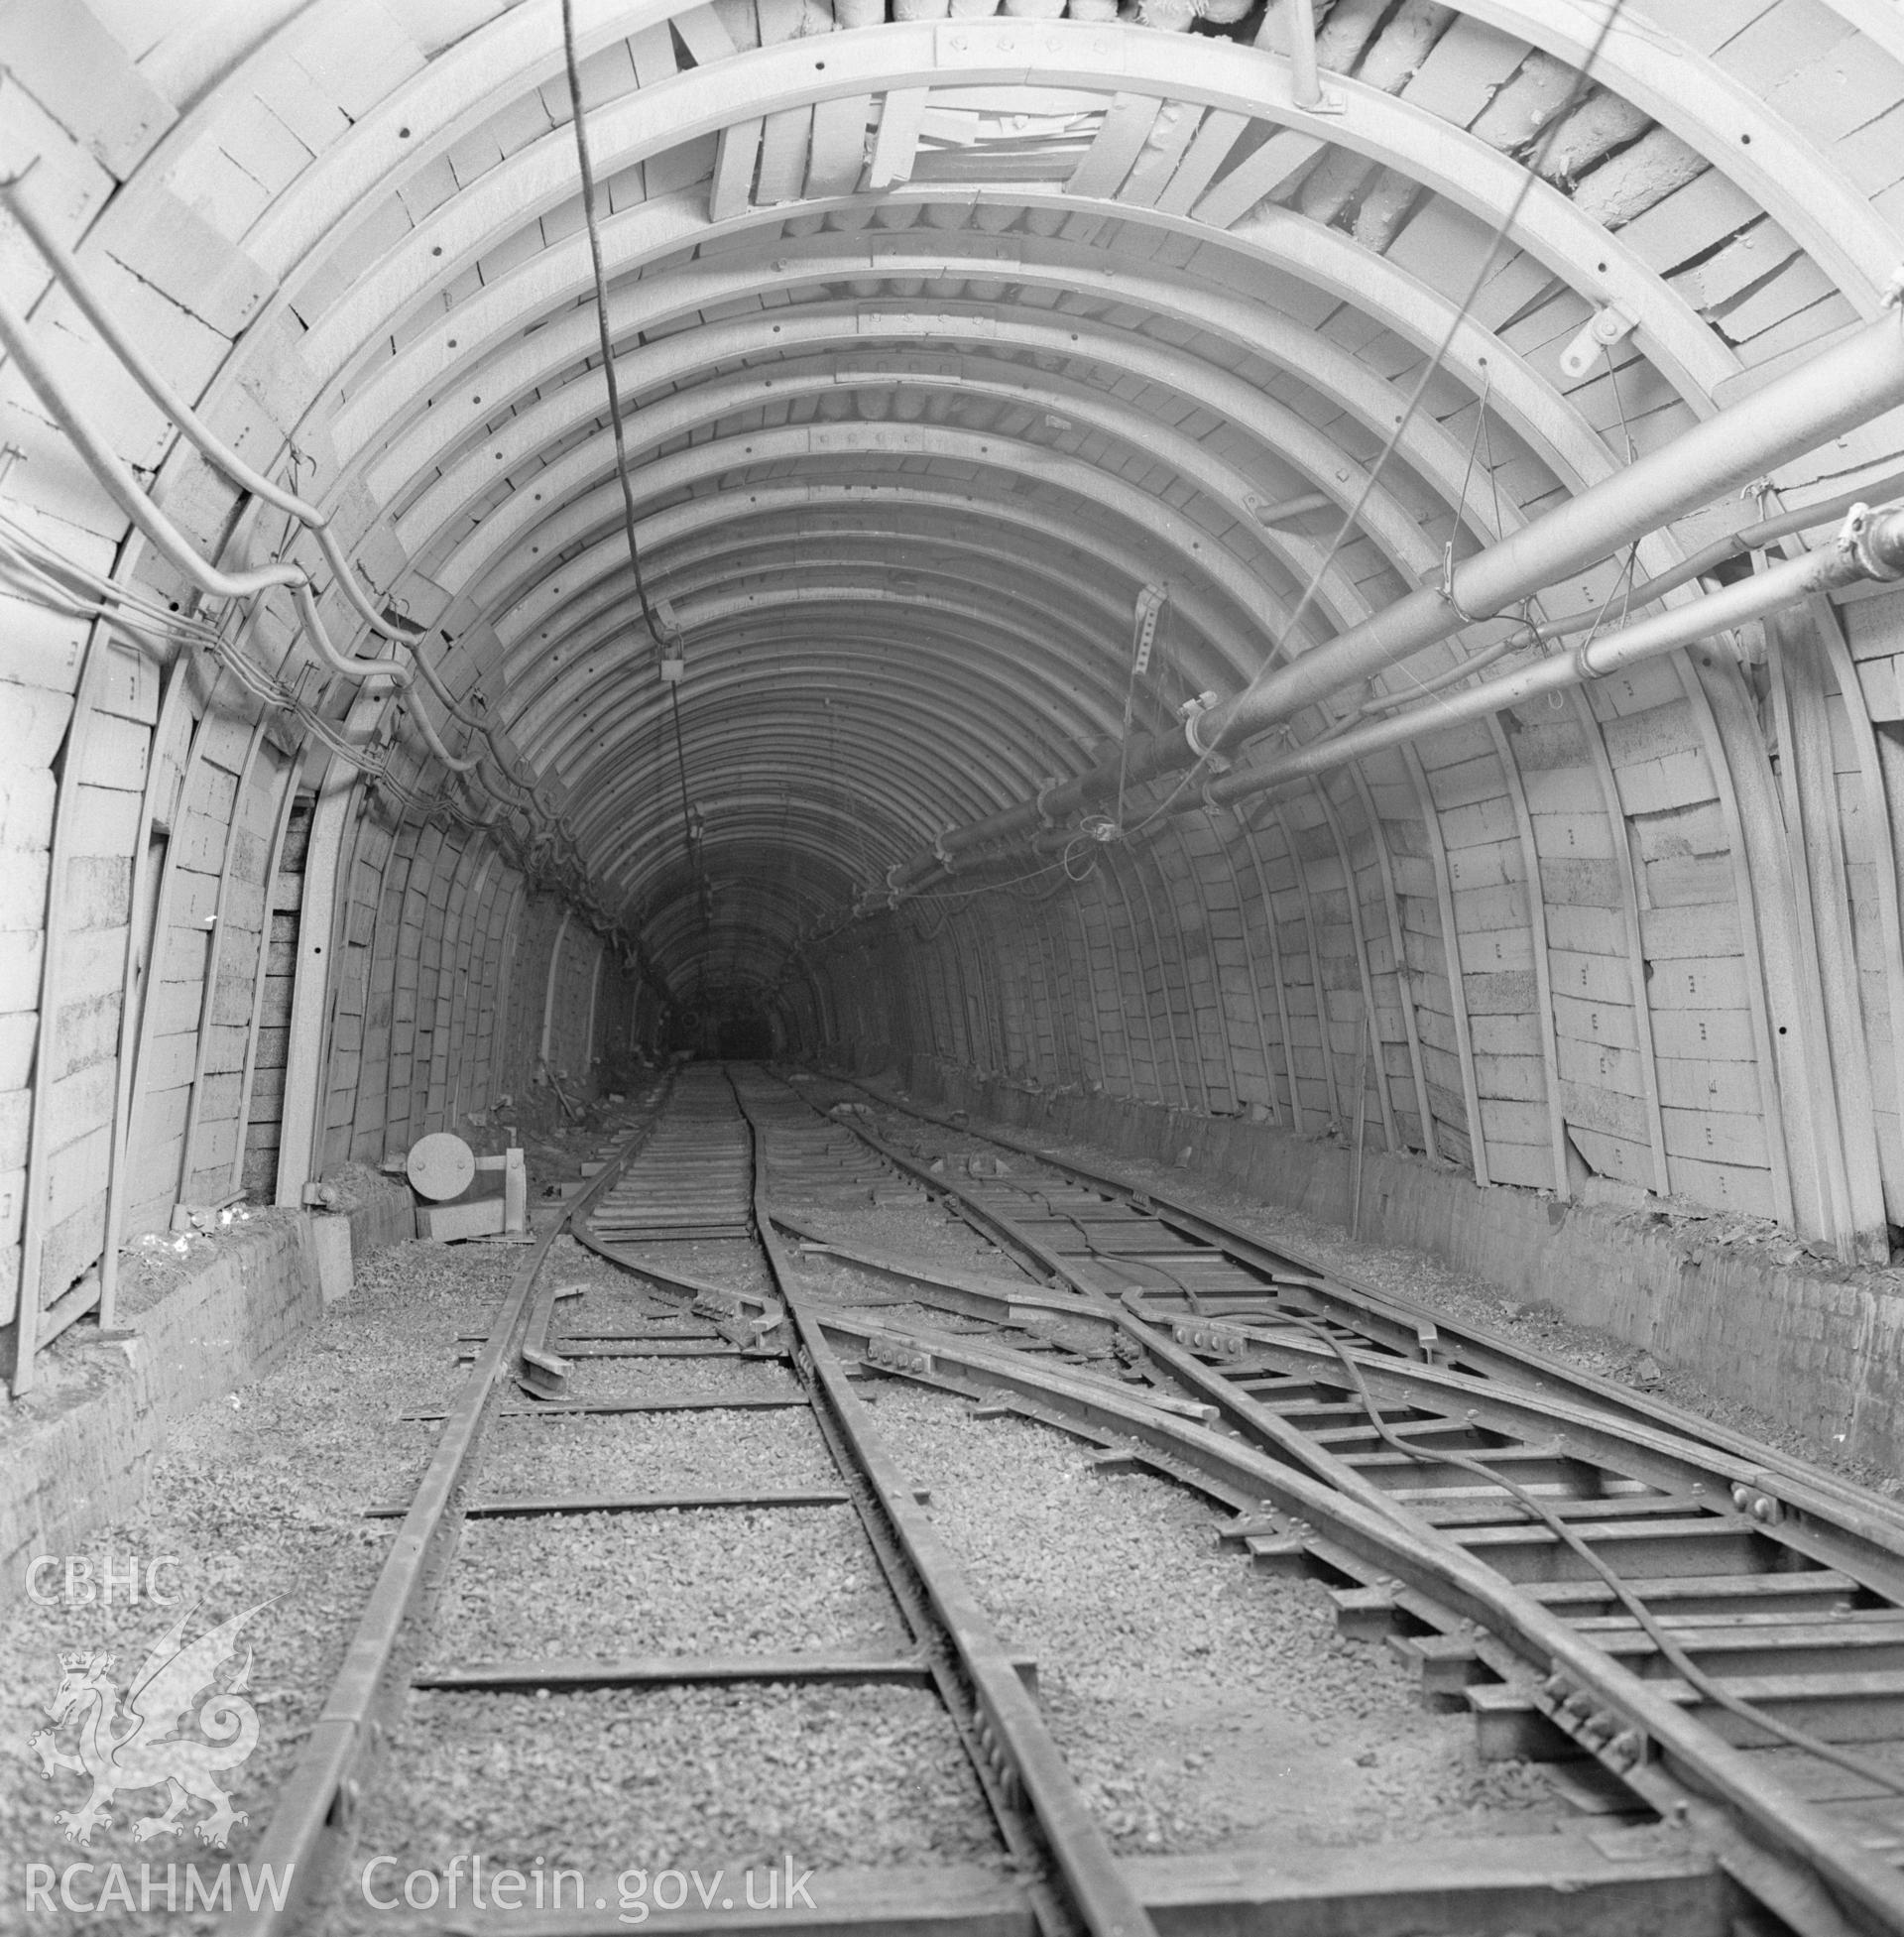 Digital copy of an acetate negative showing roadway at Taff Colliery, from the John Cornwell Collection.